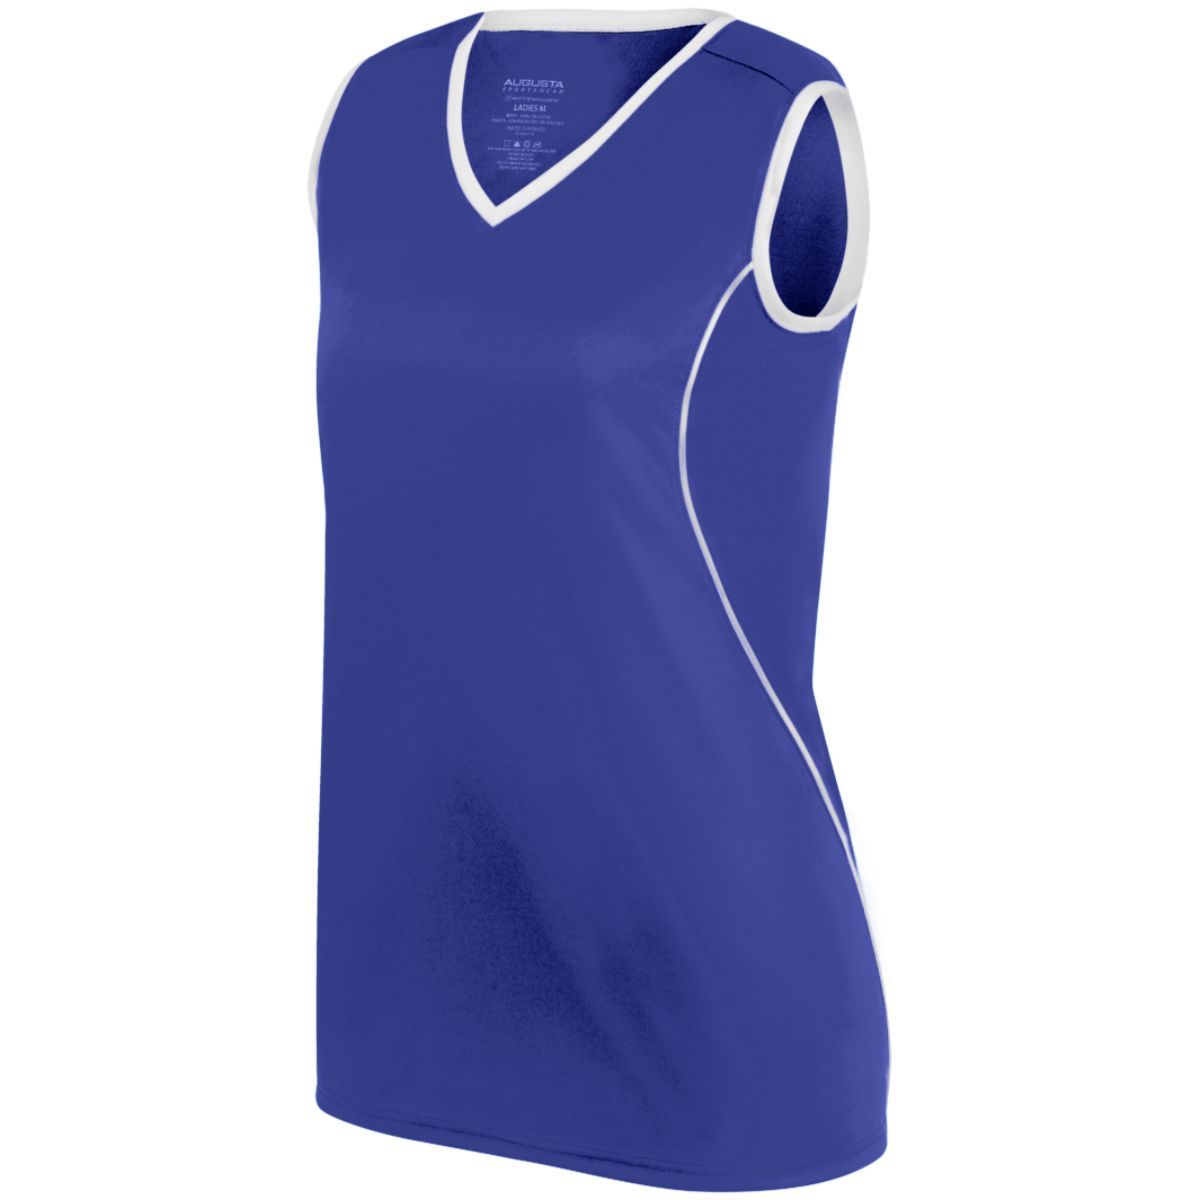 Augusta Sportswear Ladies Firebolt Jersey in Purple/White  -Part of the Ladies, Ladies-Jersey, Augusta-Products, Softball, Shirts product lines at KanaleyCreations.com